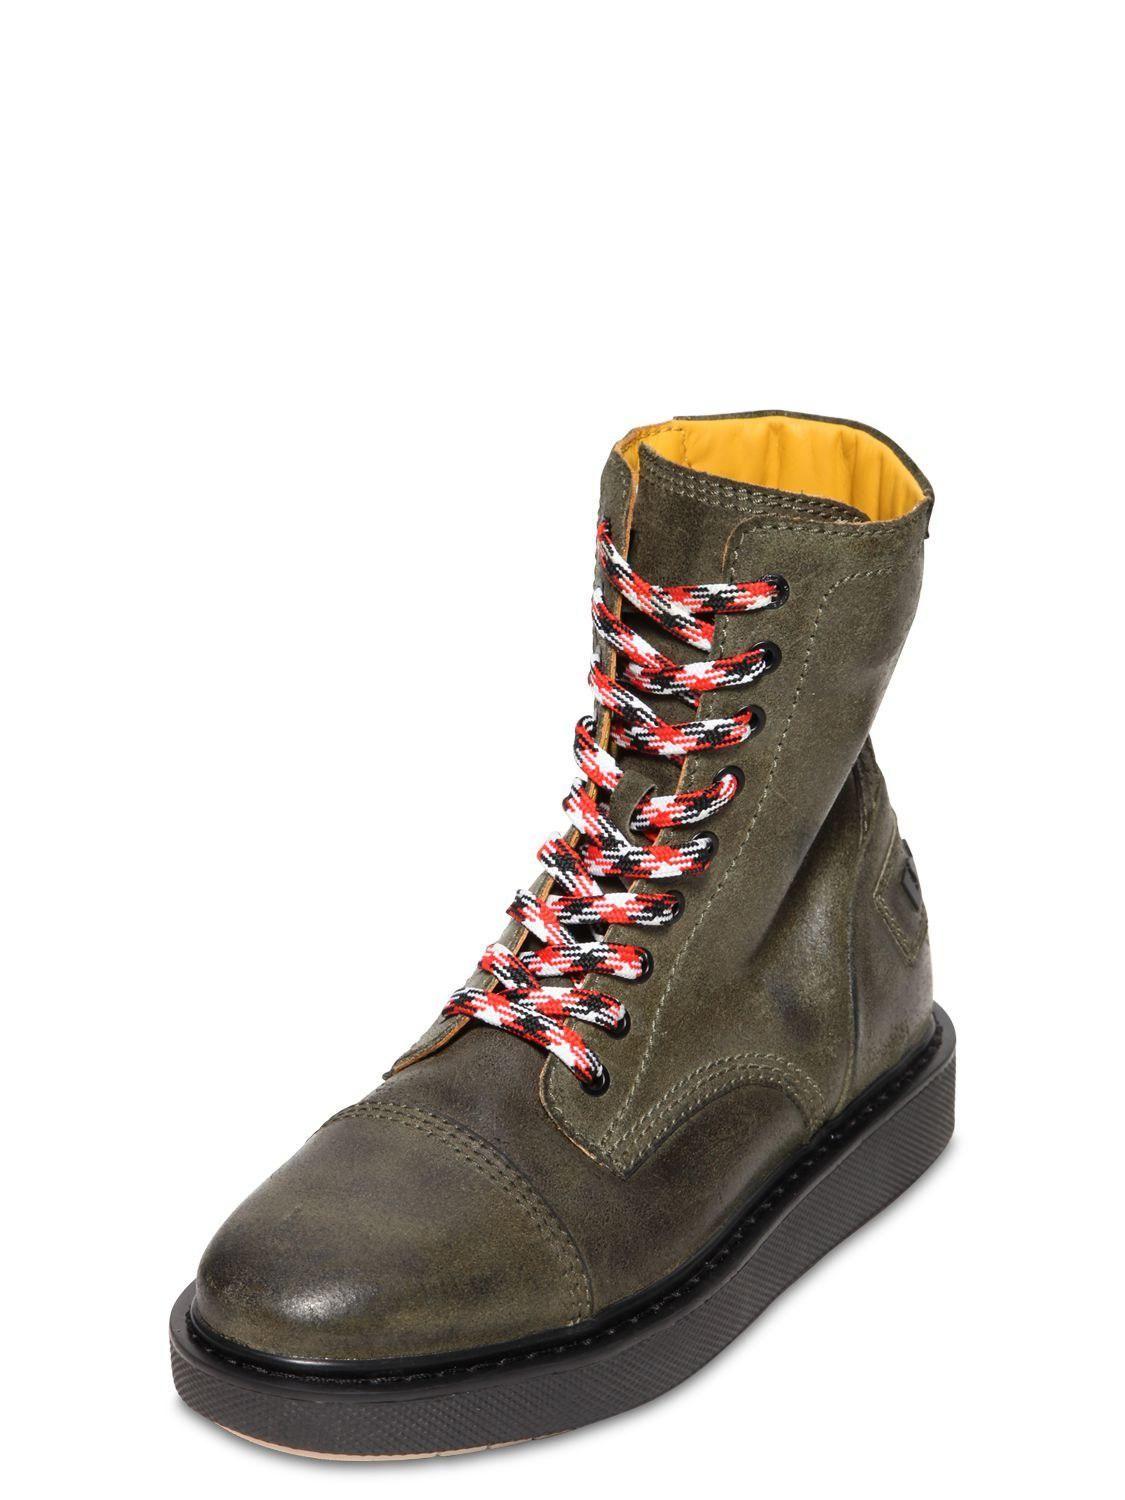 Green Boots Logo - DIESEL Reworked Logo Vintage Leather Boots in Green for Men - Lyst